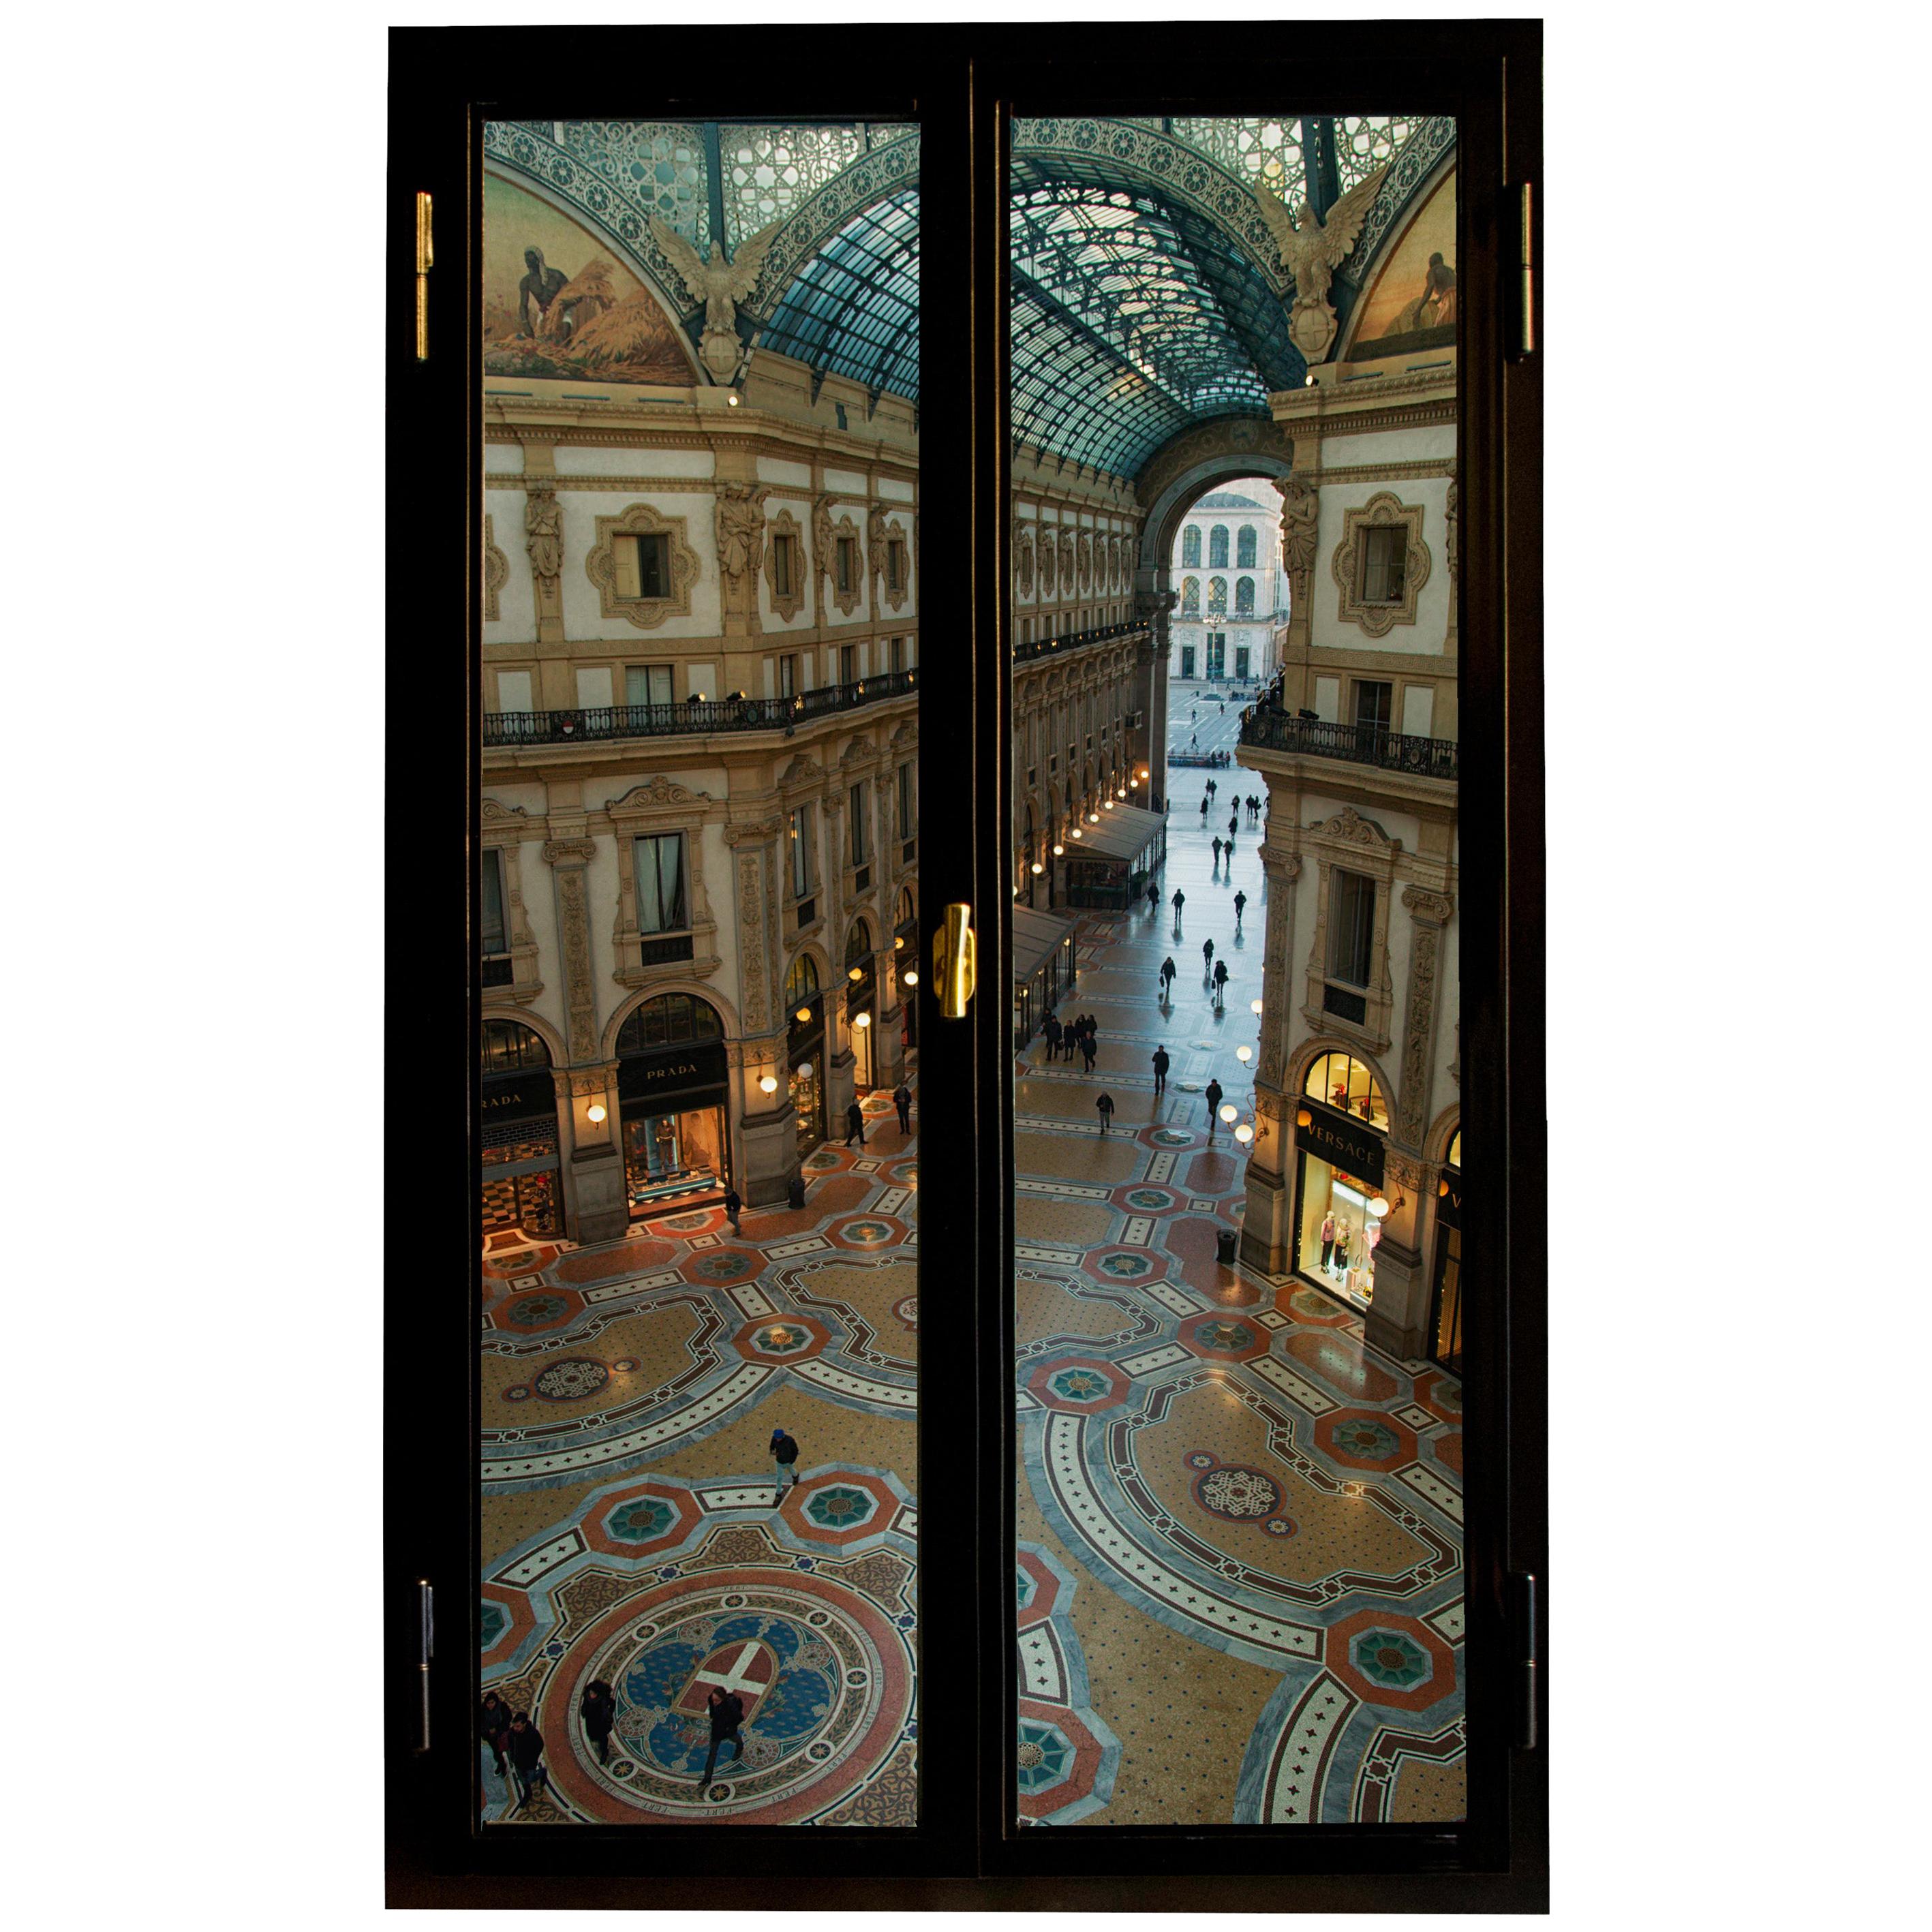 Anotherview N.10 „A Day in the Life of Galleria Vittorio Emanuele“ von Anotherview im Angebot